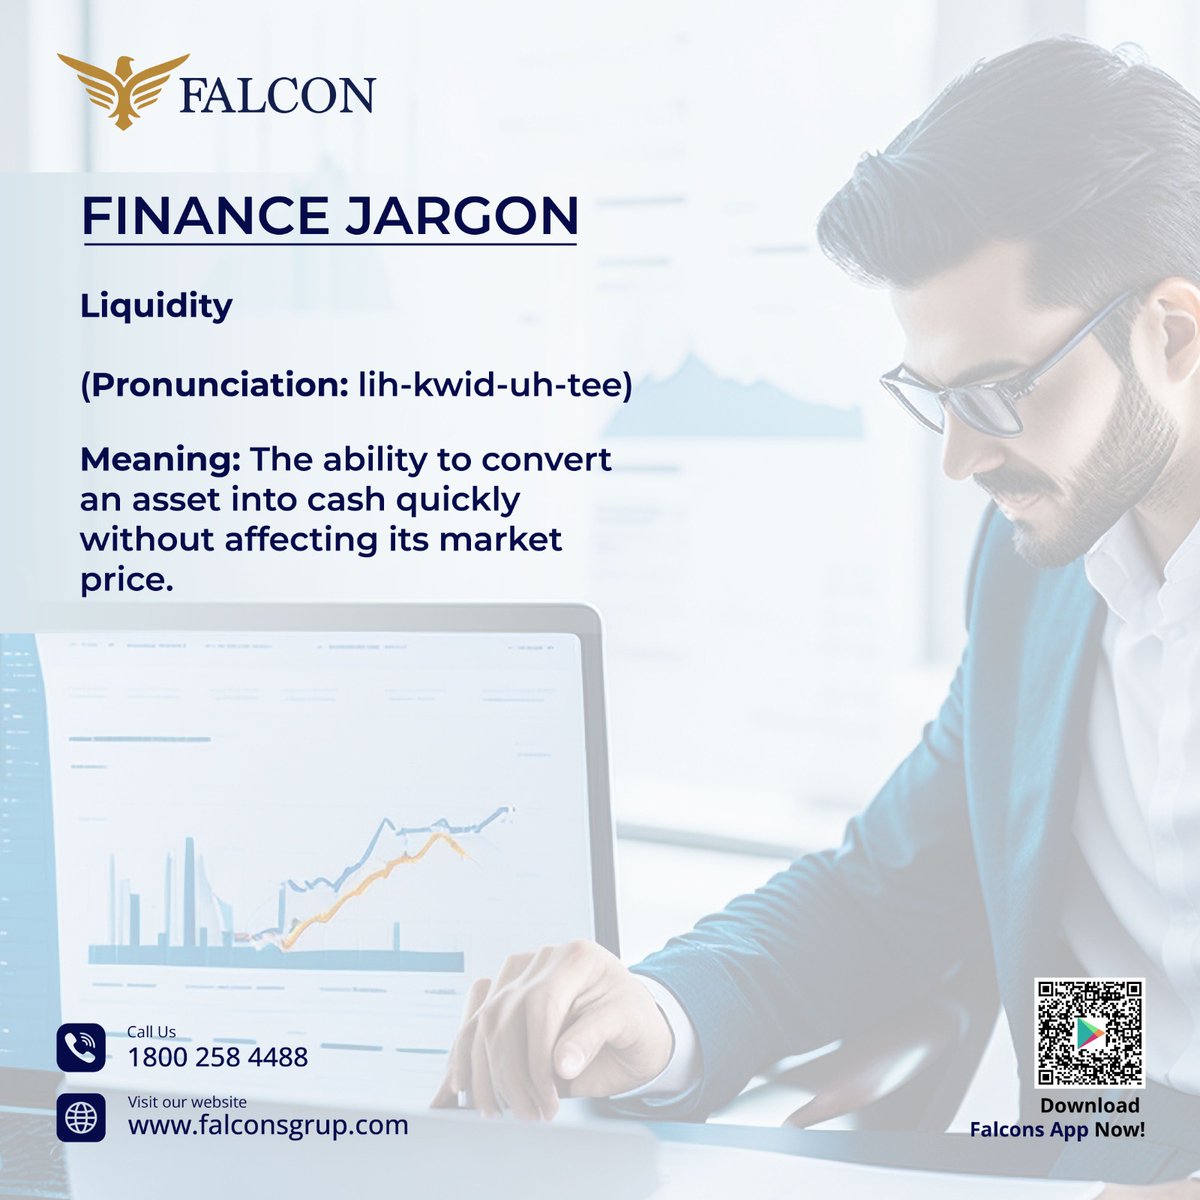 Cash flow feeling tight? Liquidity is your lifeline! It's about having assets you can swiftly convert to cash. Keep your financial waters flowing smoothly

Visit: falconsgrup.com
Contact us: 18002584488

#financejargon #financejargons #falcon #falconinvoicediscounting